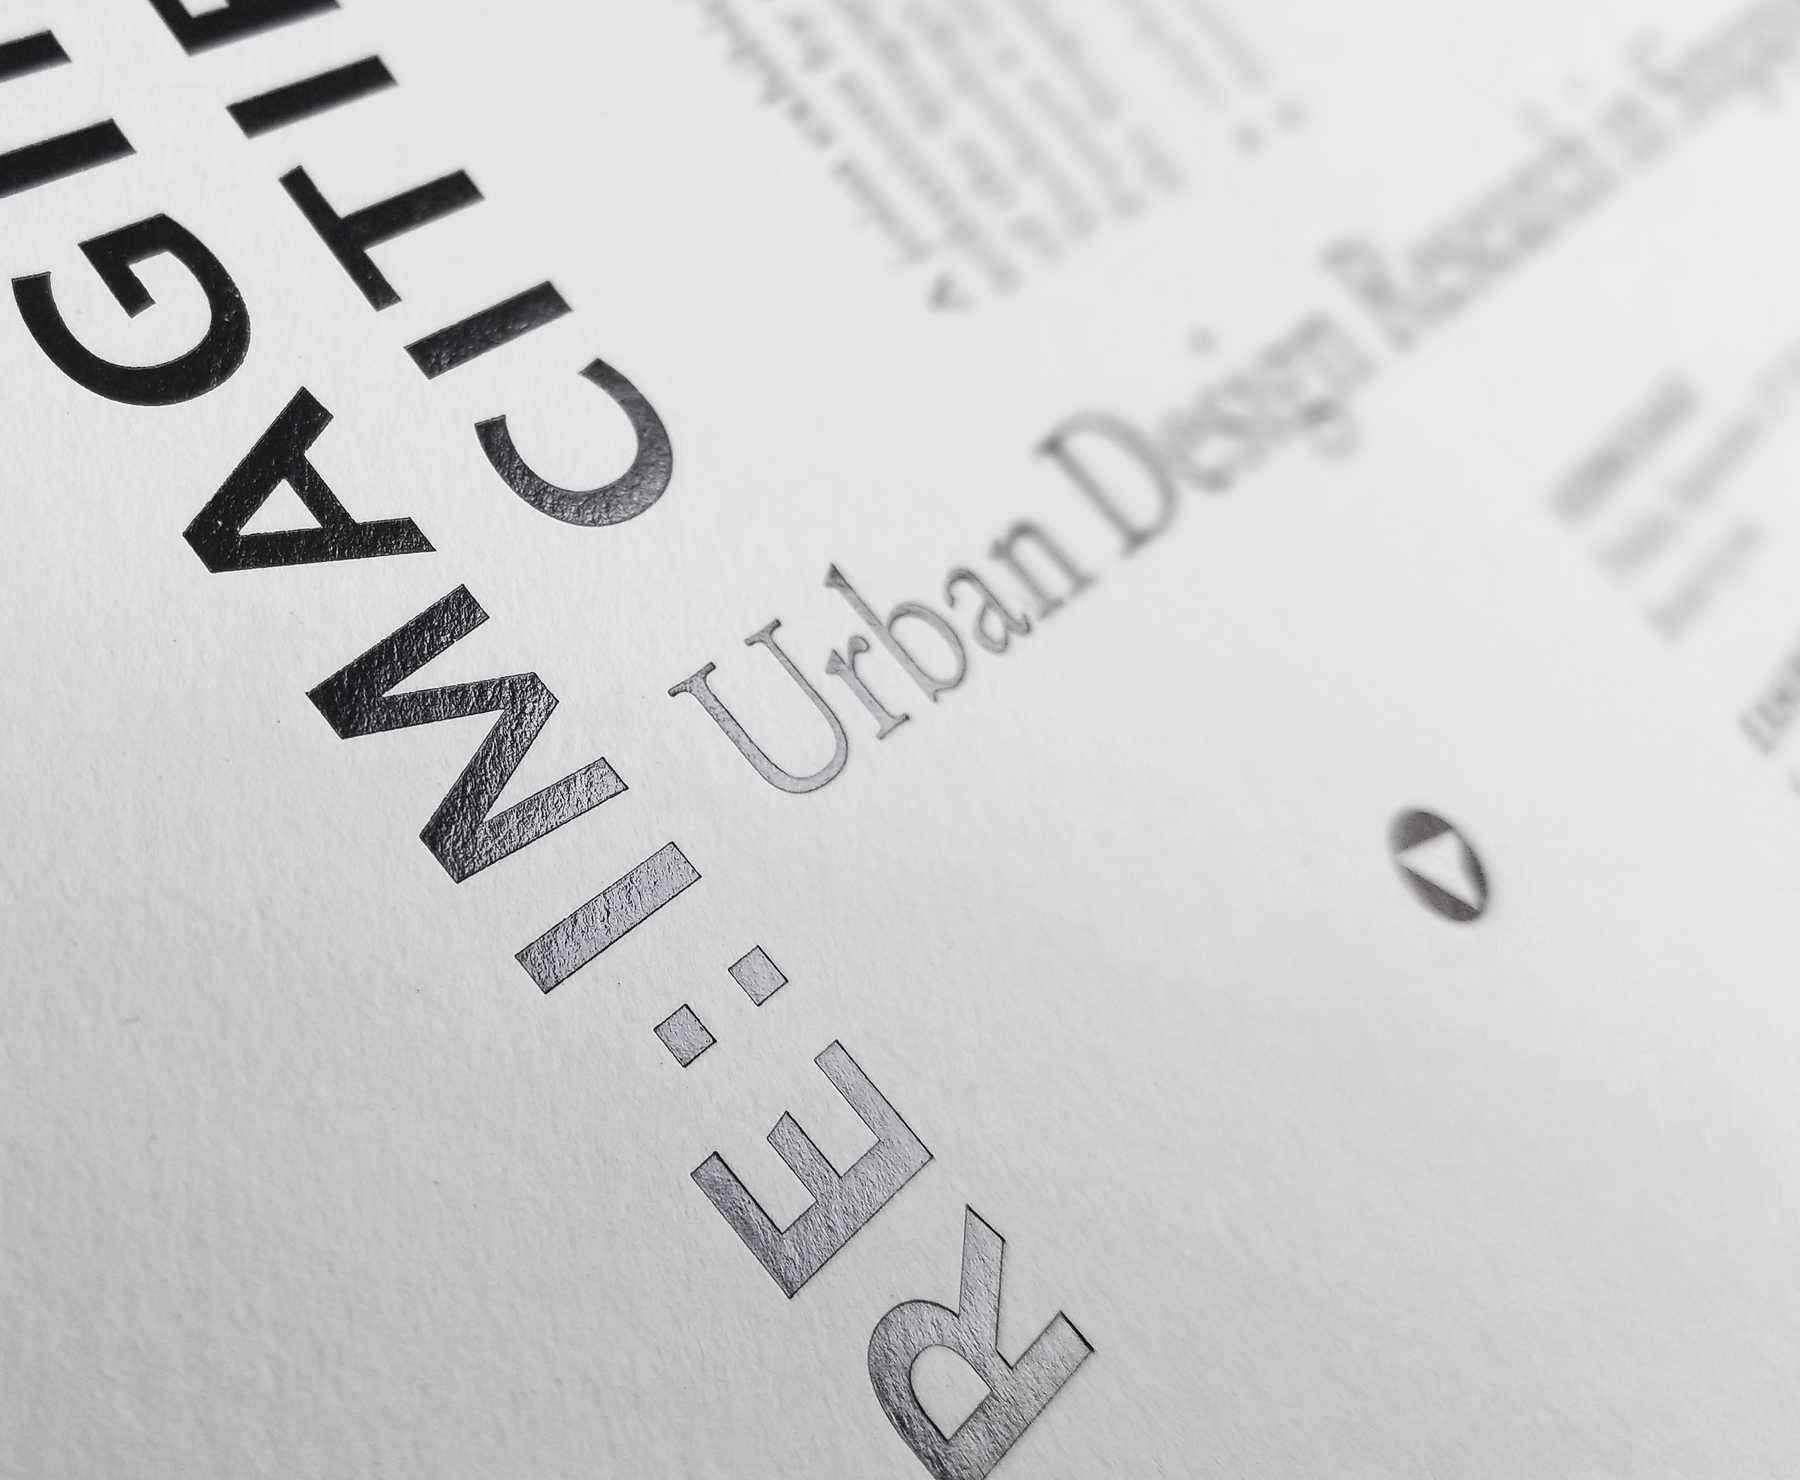 Re:Imagining Cities flyer close up